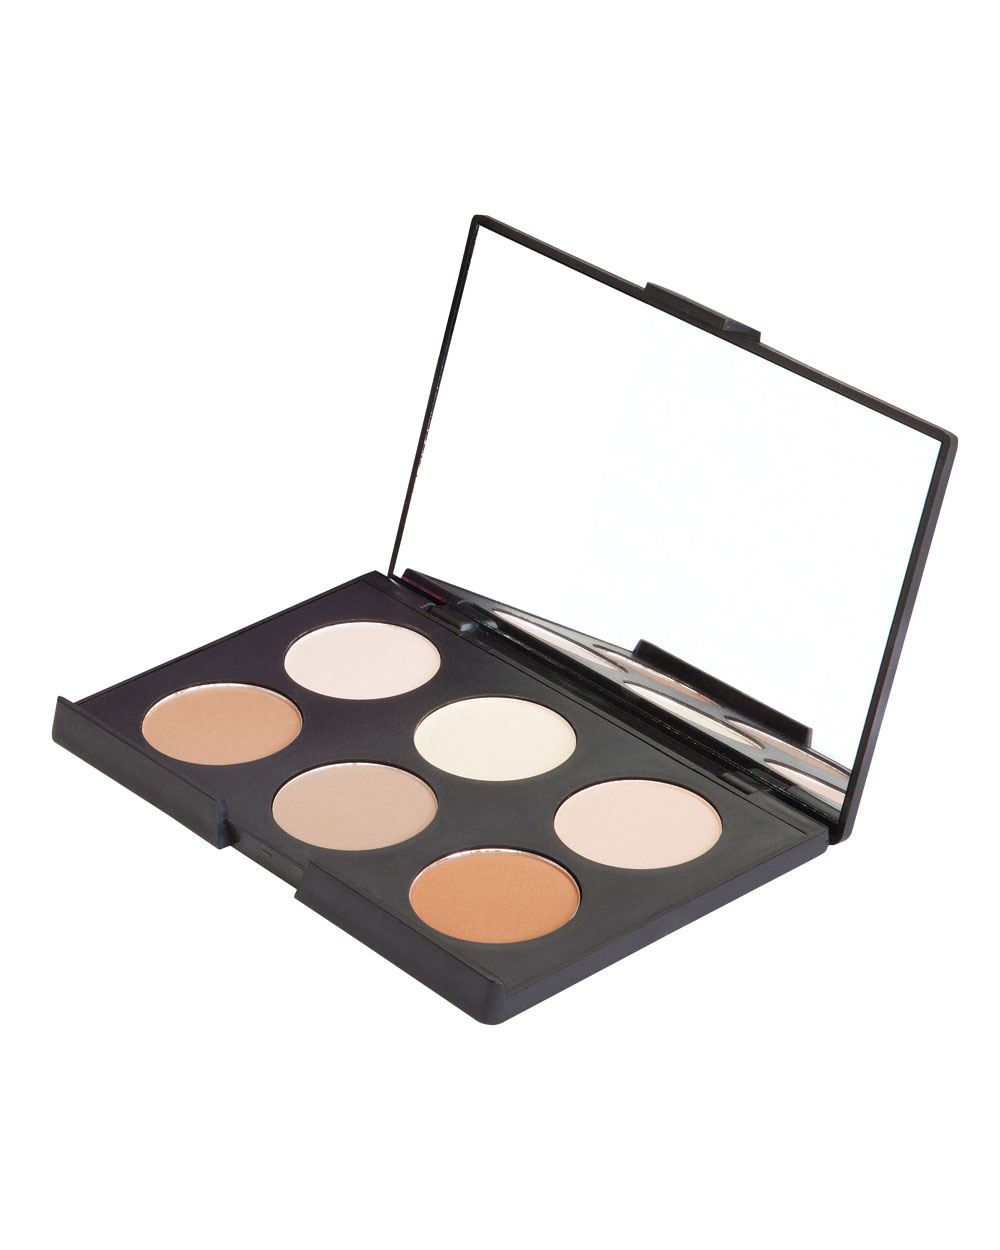 Cheekbone game strong Australis AC on Tour Powder Contouring and Highlighting Palette, $21.50